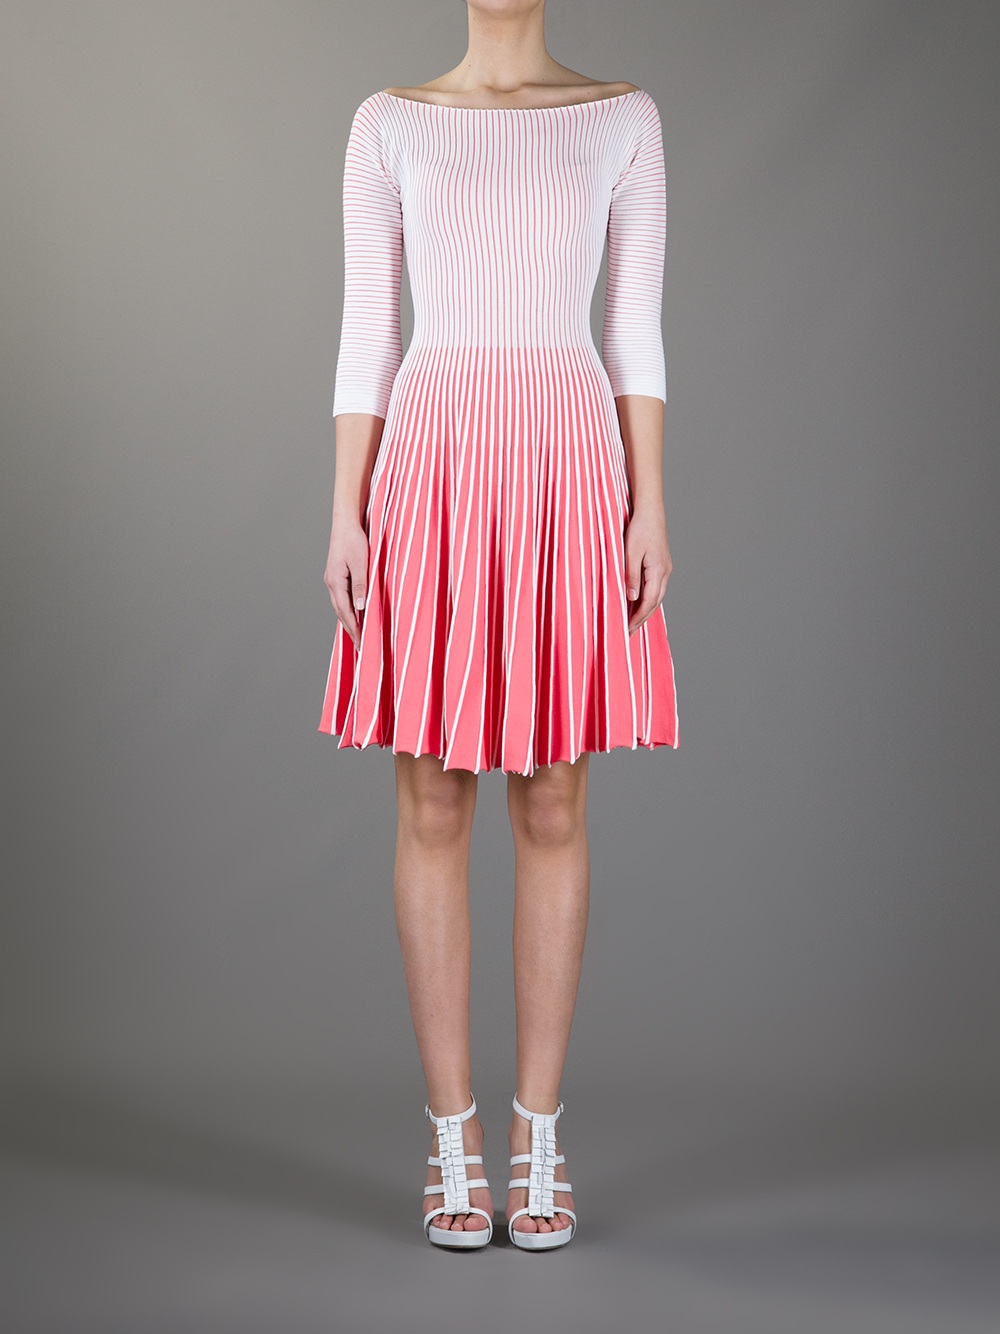 Emporio Armani Striped Pleated Dress in White (Pink) - Lyst